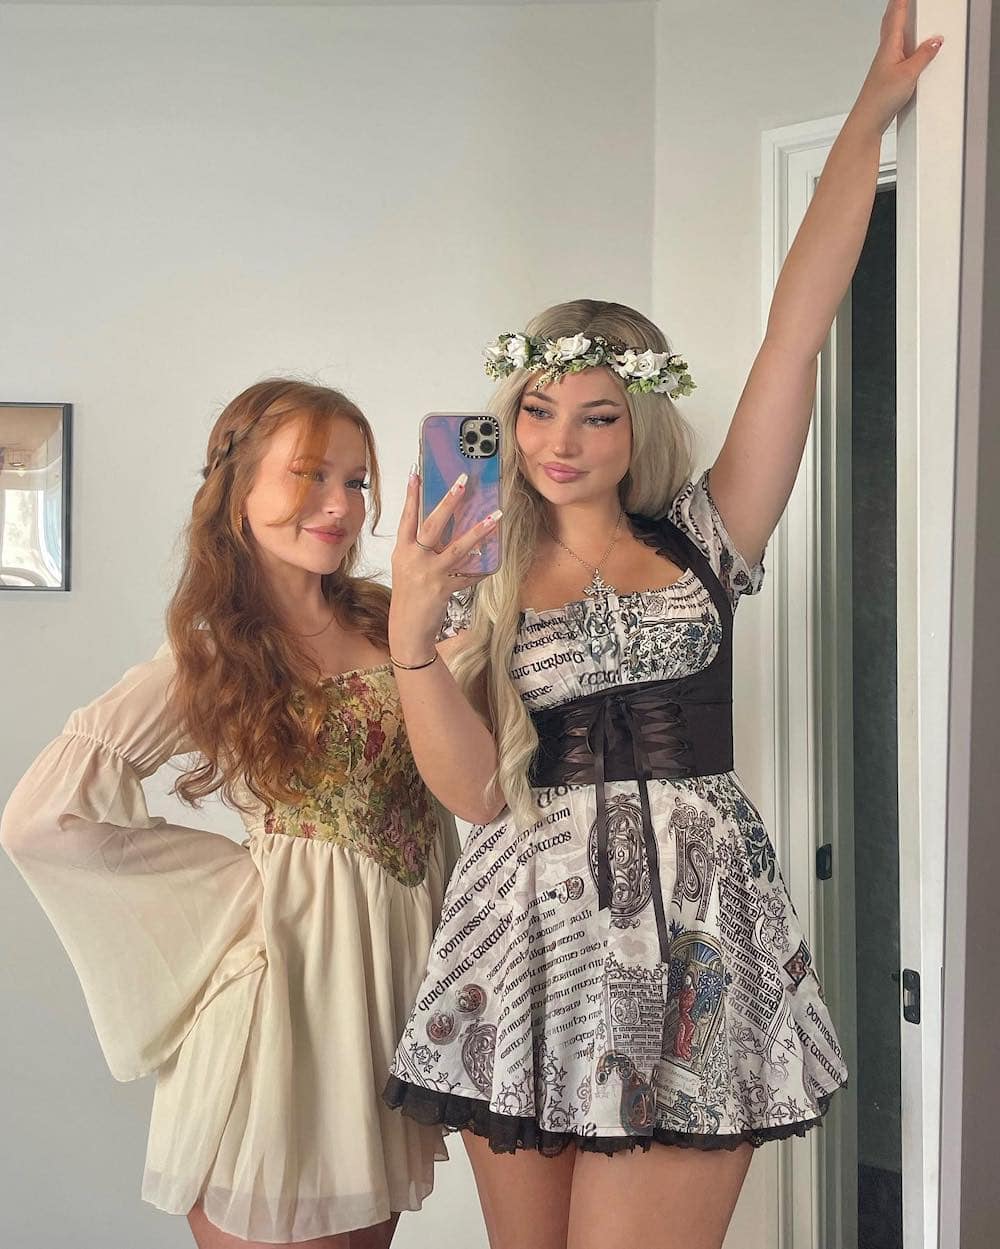 Two women dressed up as Renaissance girls on Halloween.